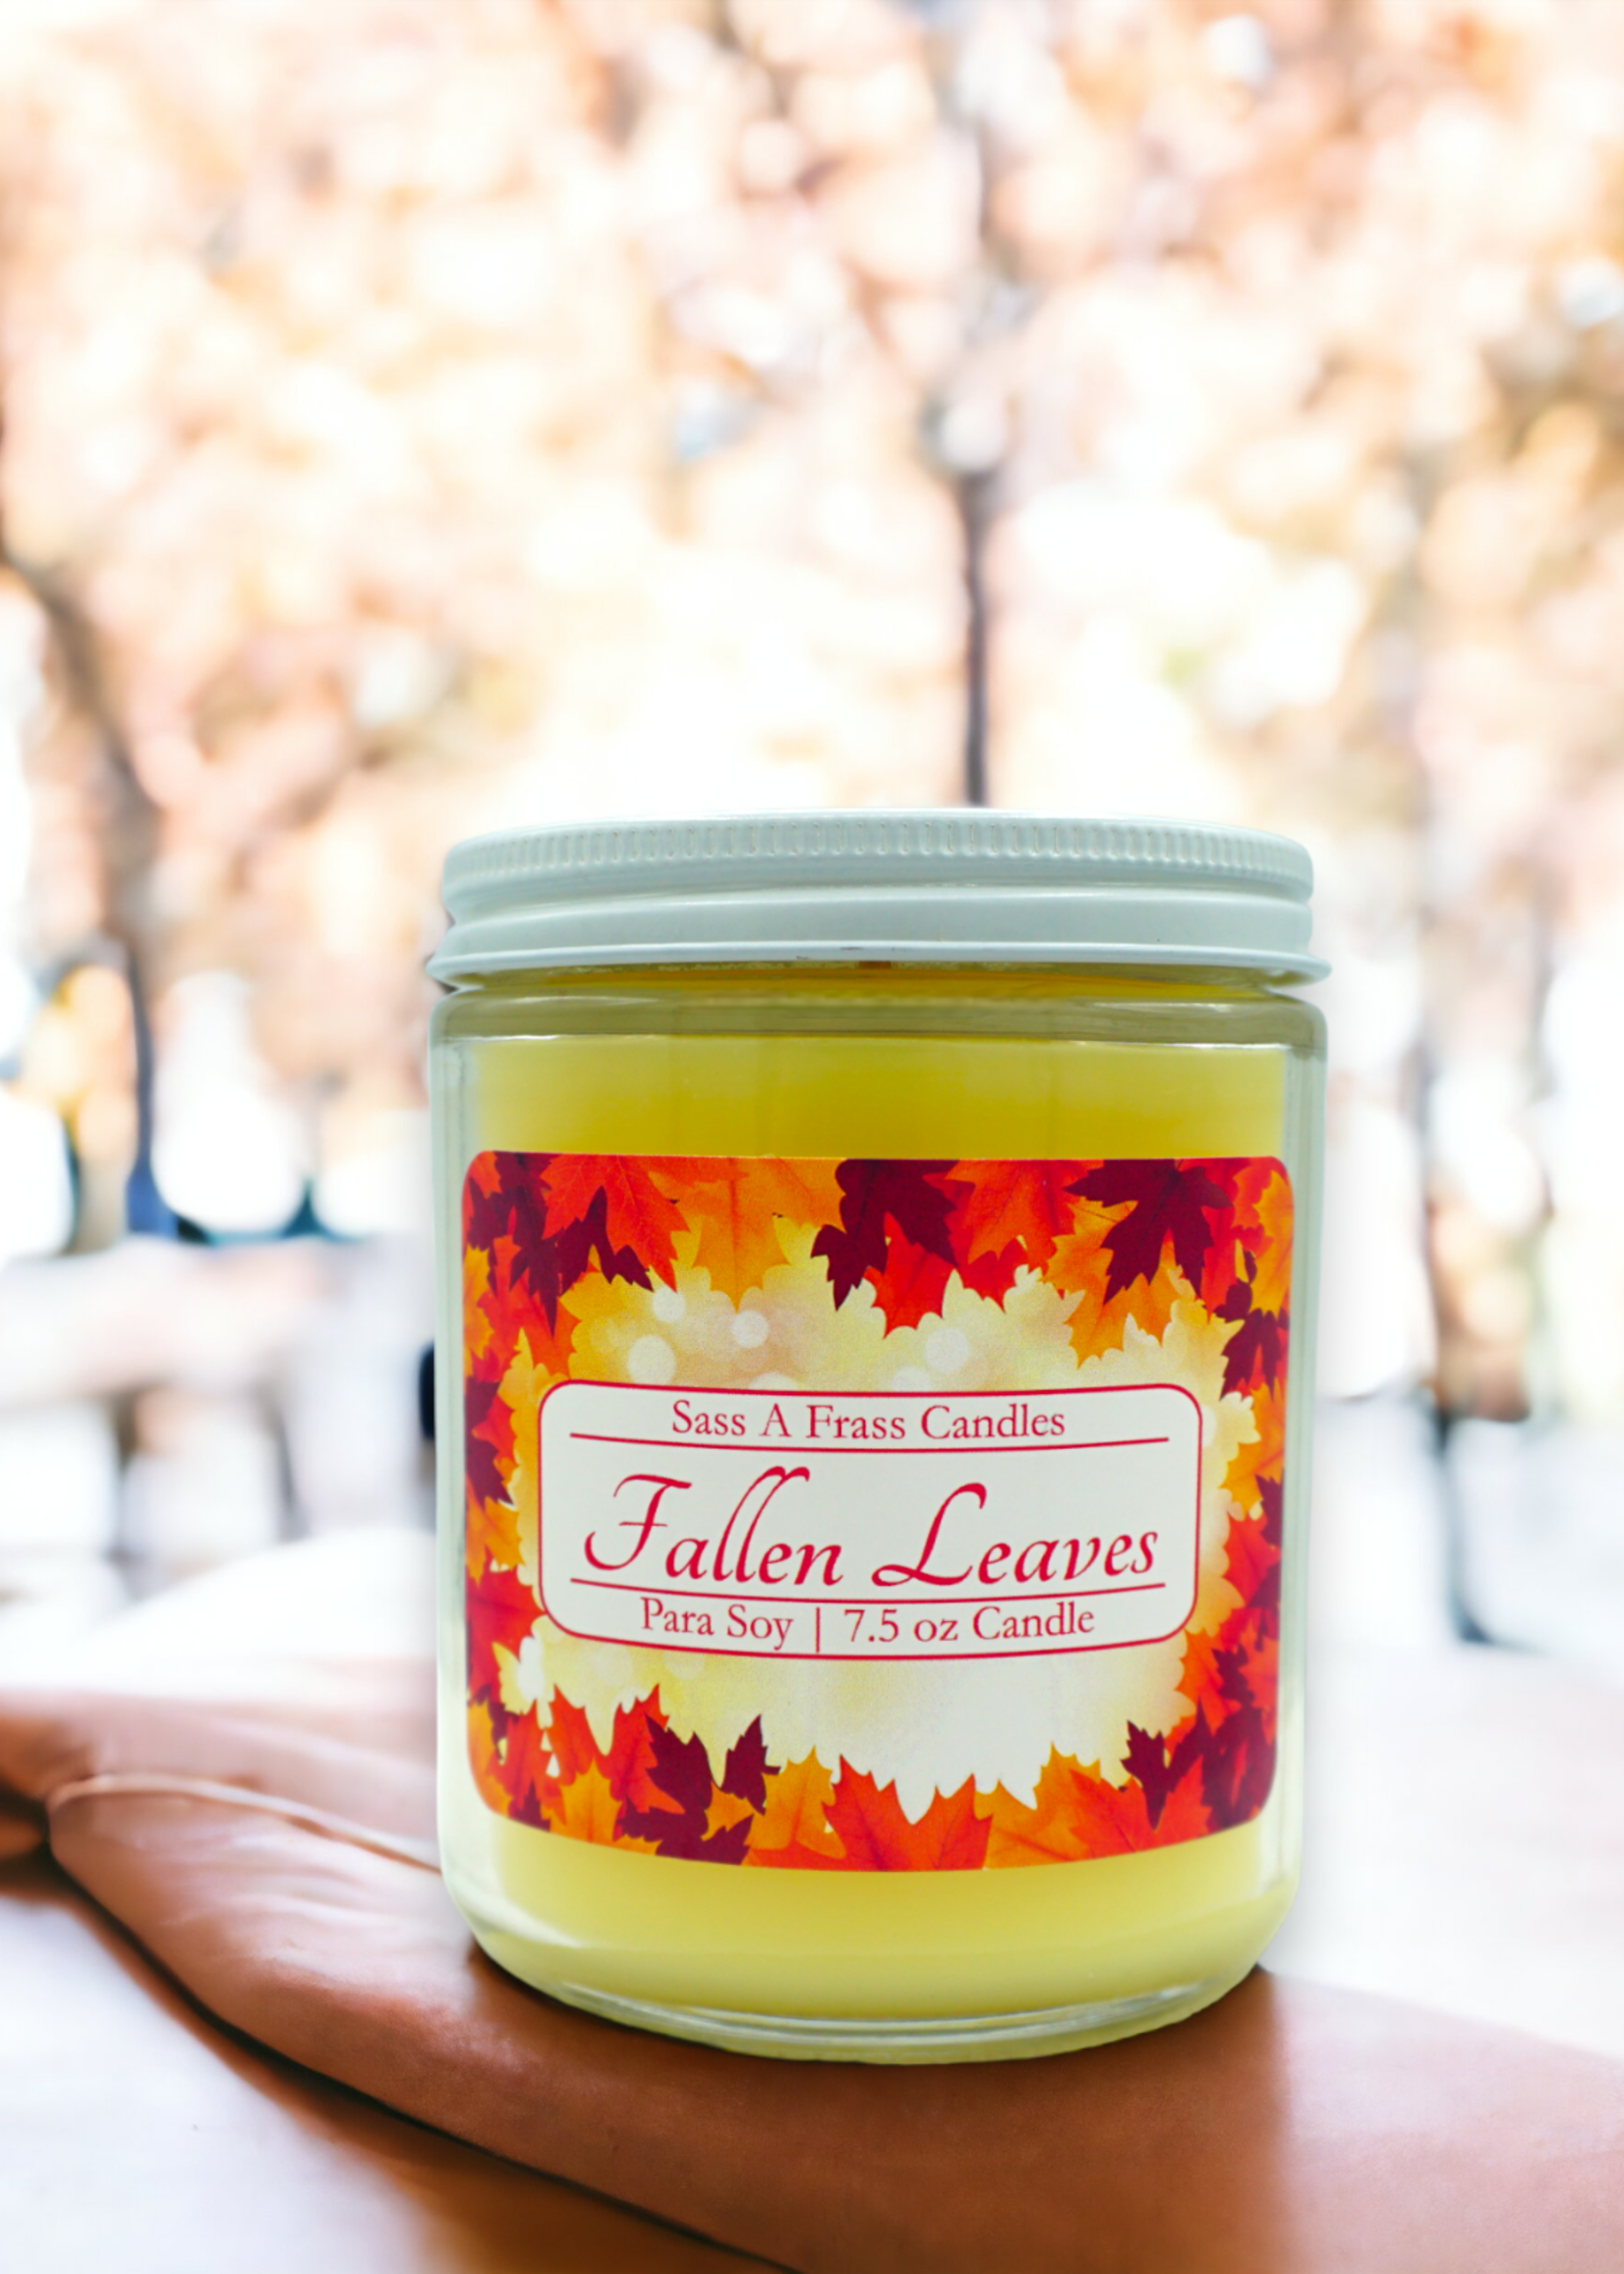 Fallen Leaves 7.5 oz Candle